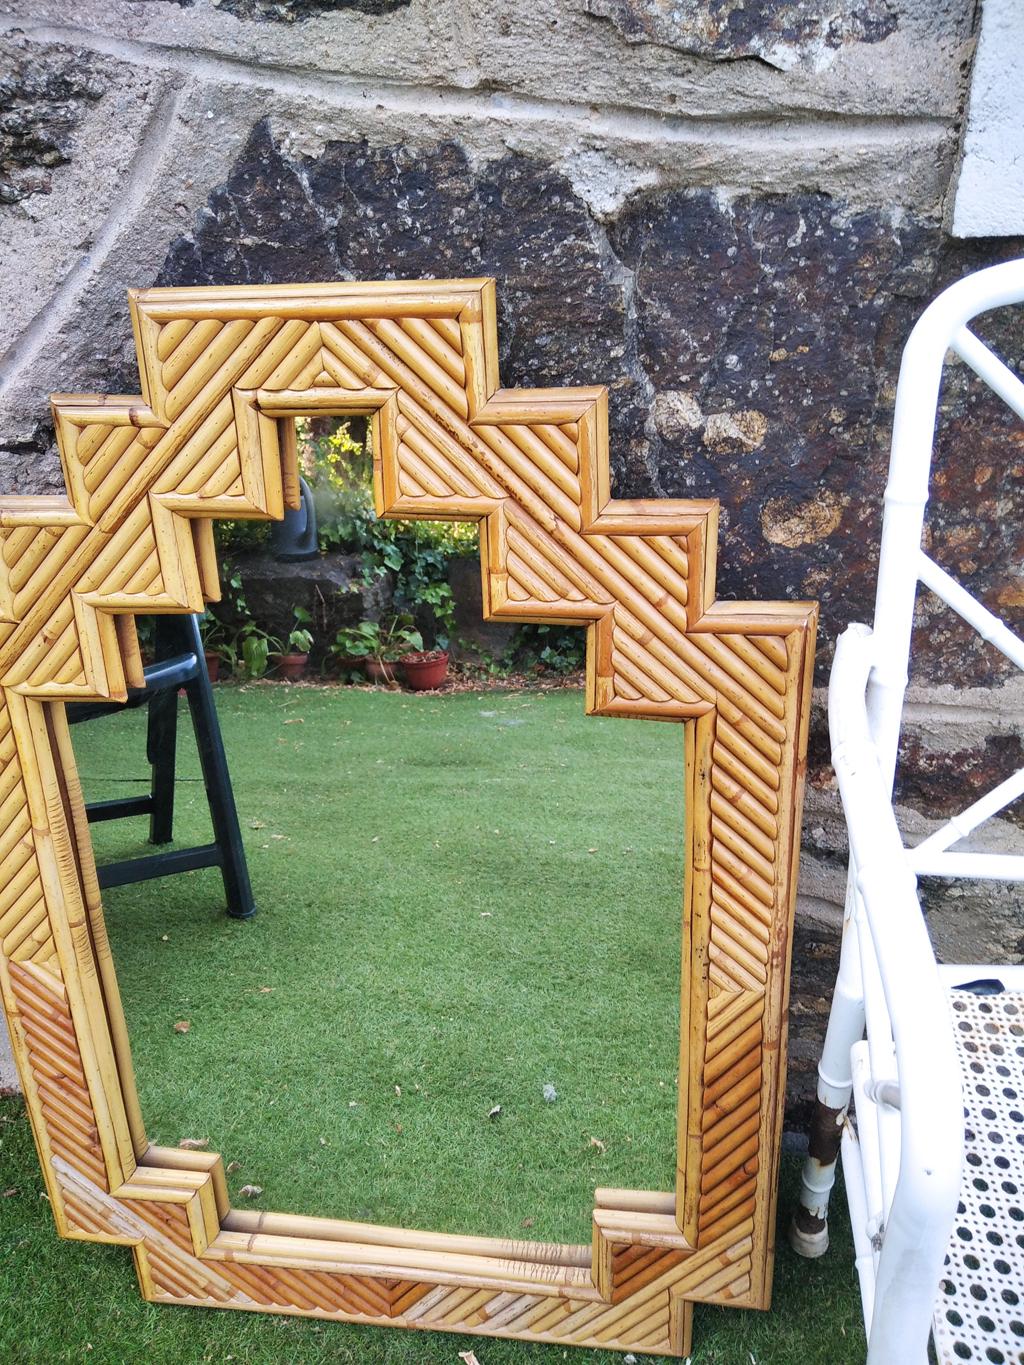 Bamboo Wall Mirror Original Style Large Size From Italy   Mid 20th Century In Excellent Condition For Sale In Mombuey, Zamora